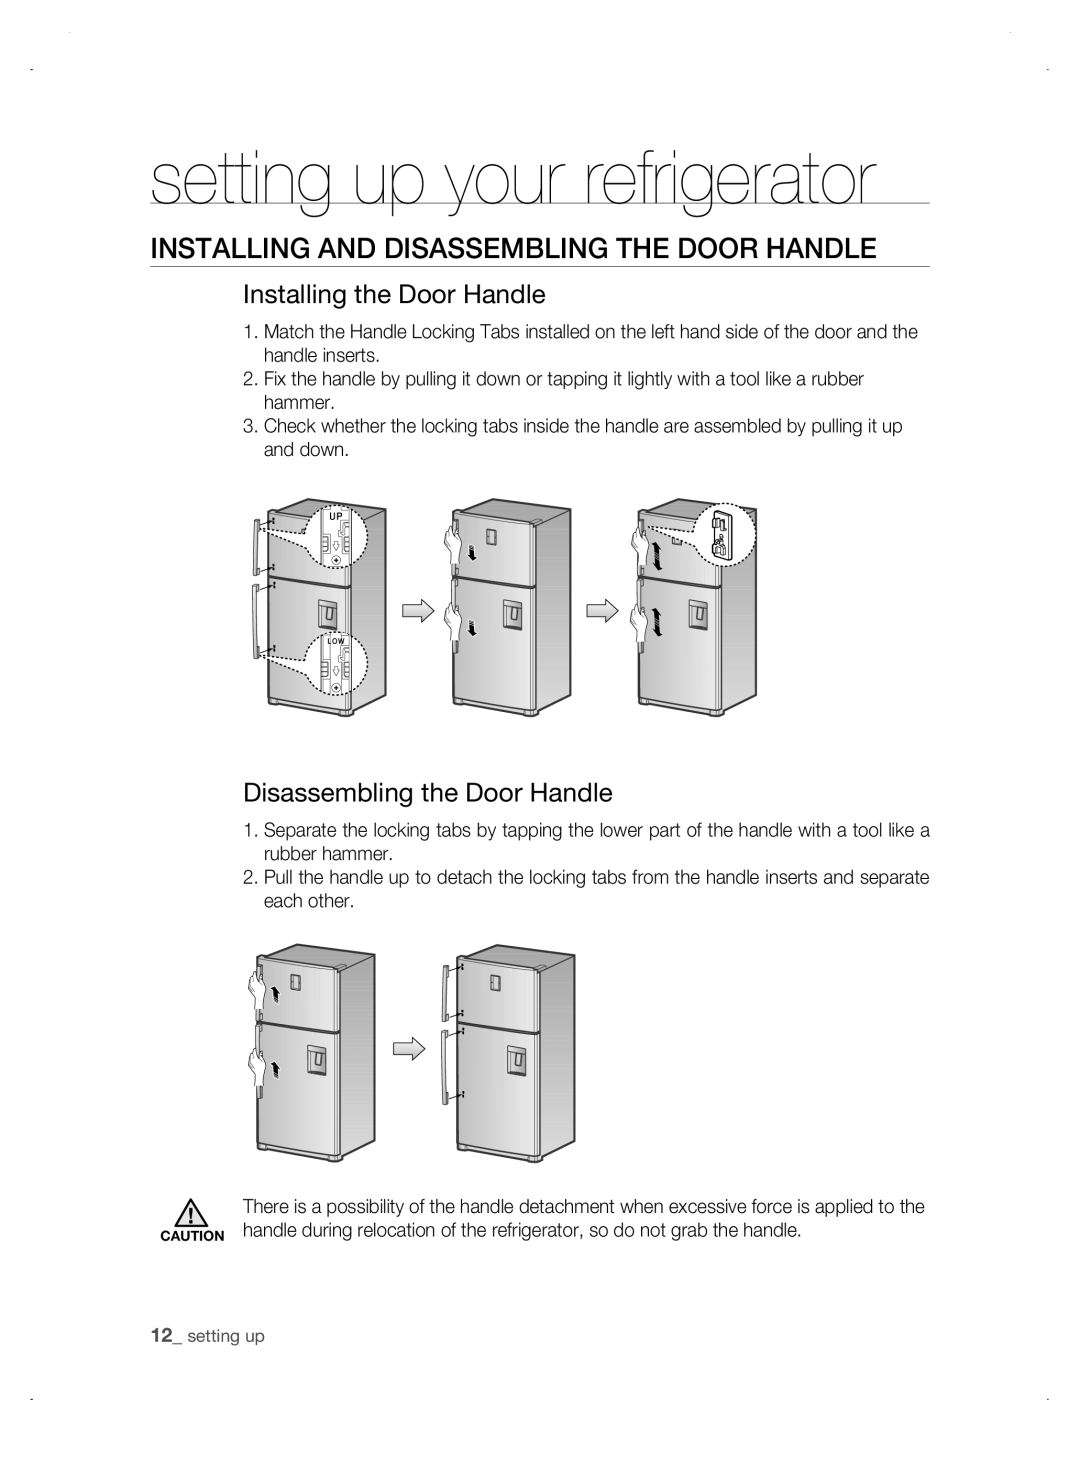 Samsung DA99-01906A Installing And Disassembling The Door Handle, Installing the Door Handle, setting up your refrigerator 